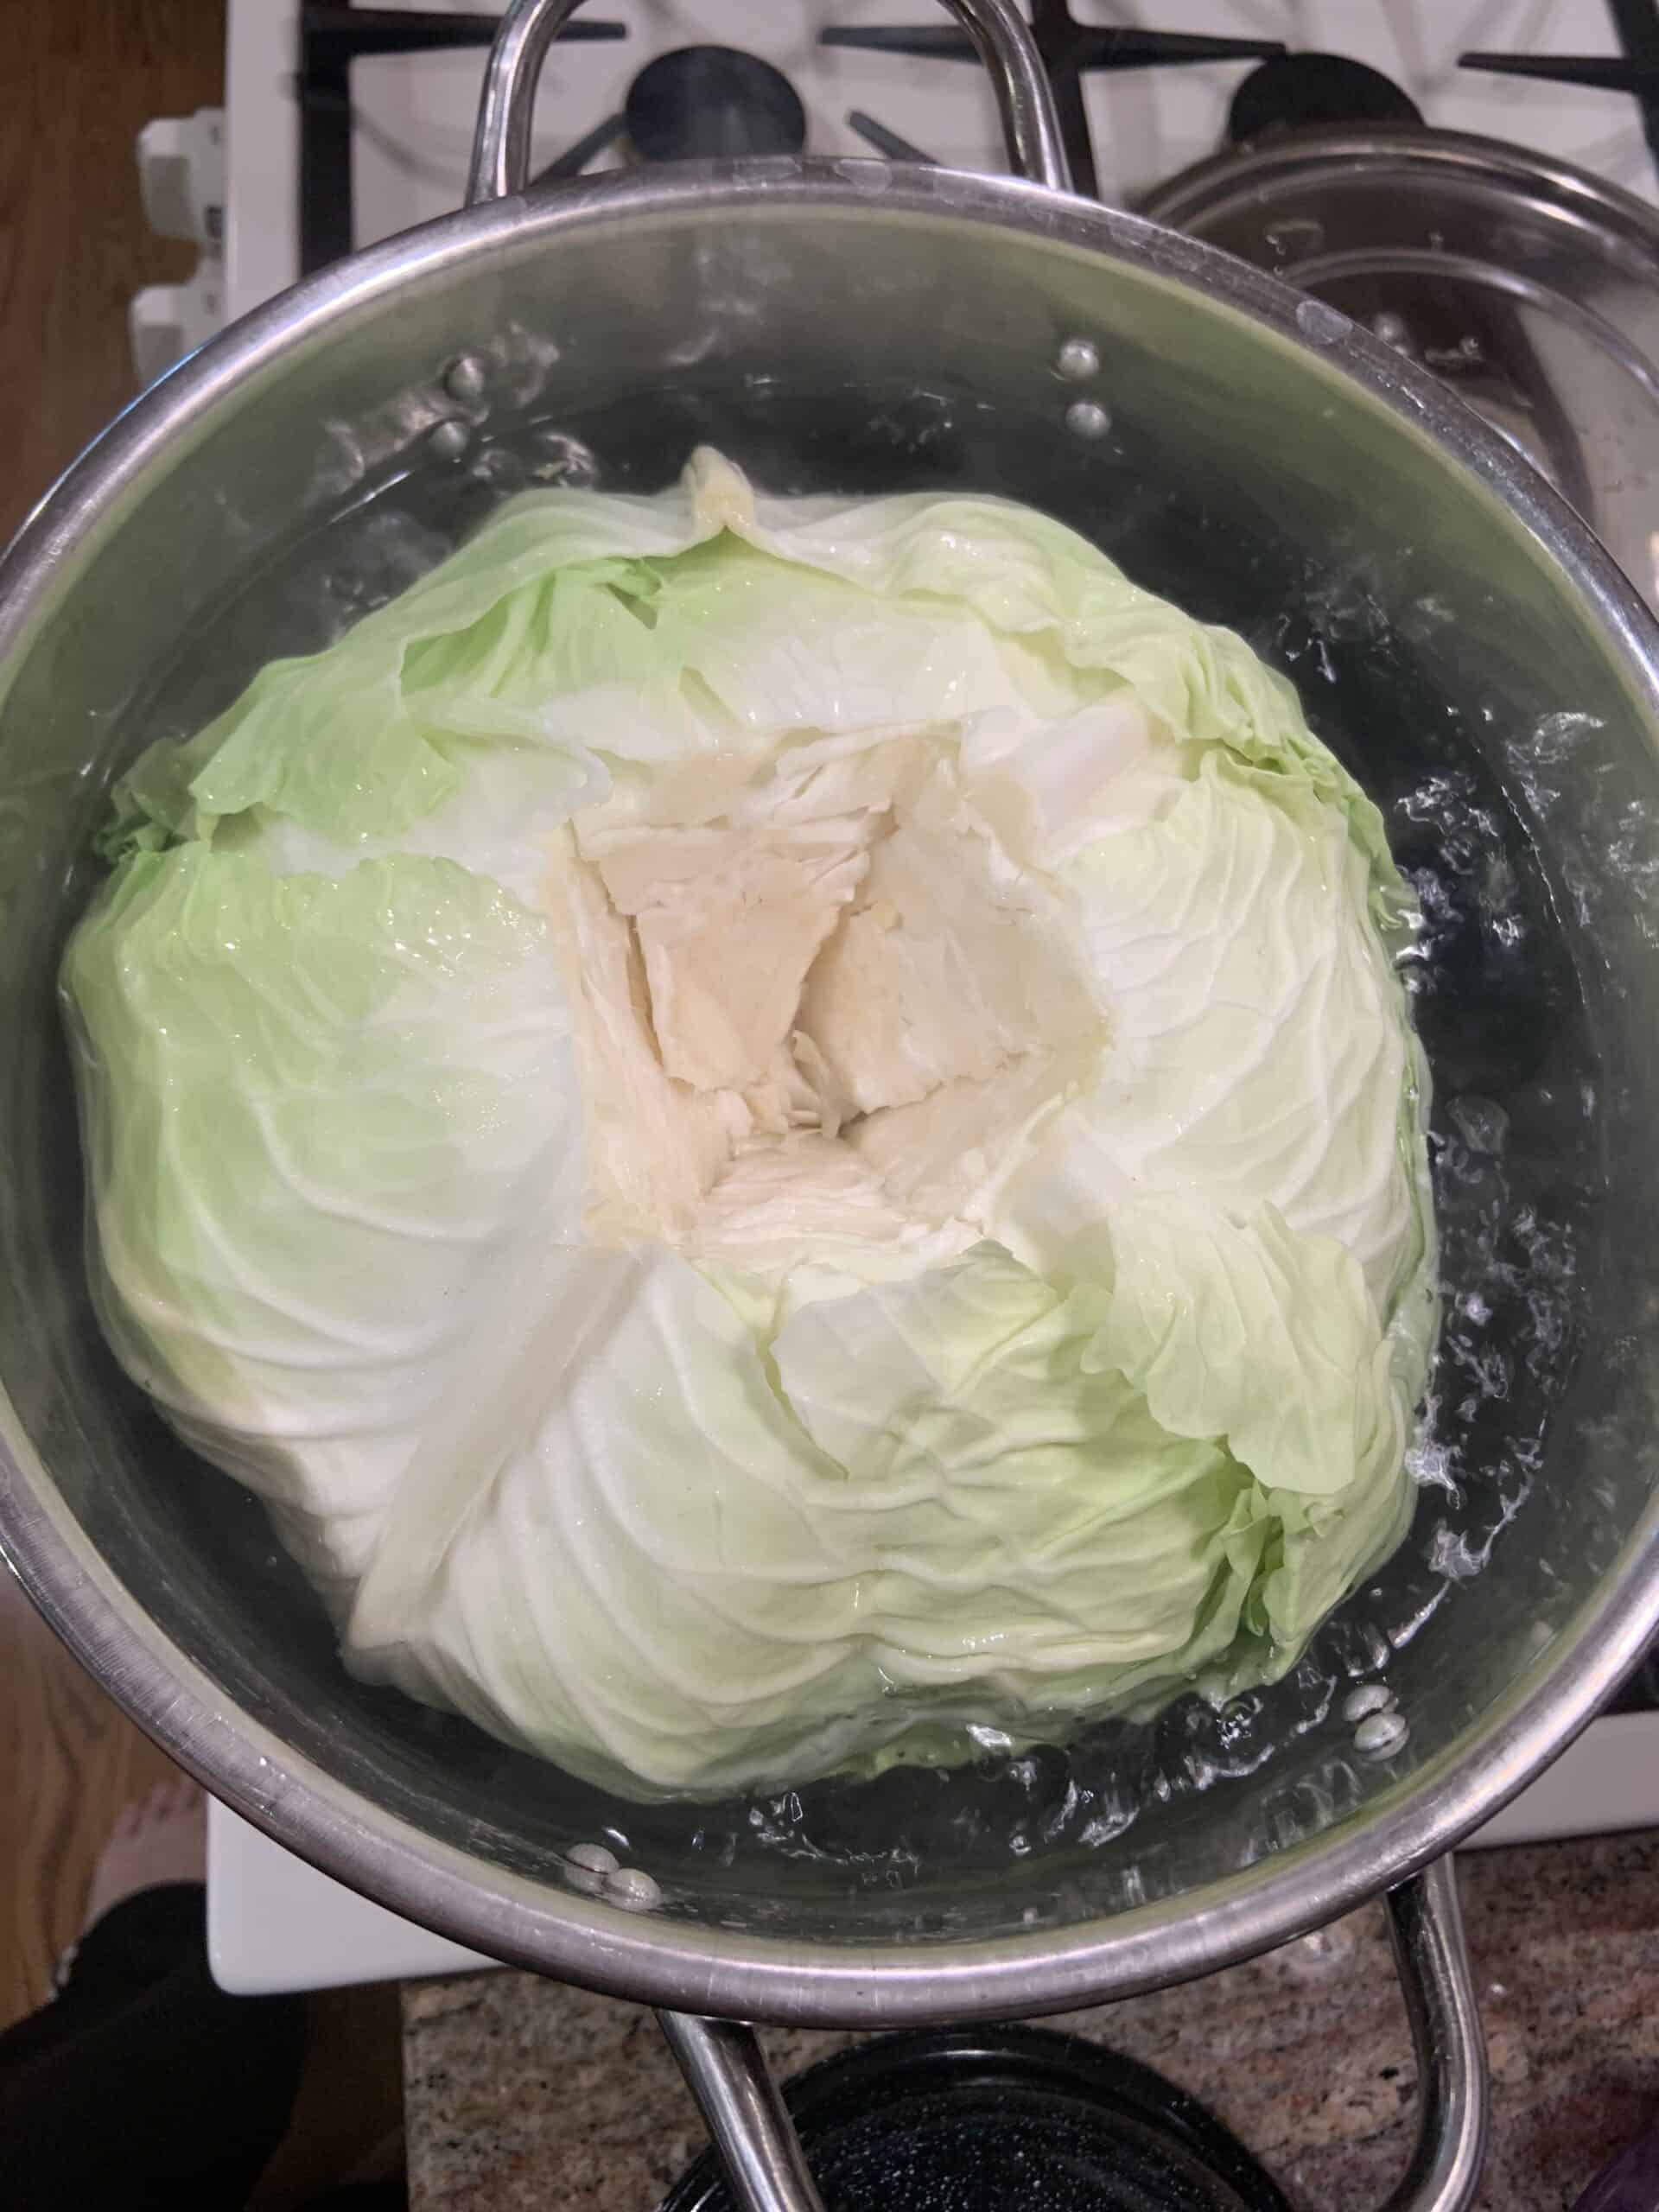 Carefully place whole cabbage head into a pot of boiling water.